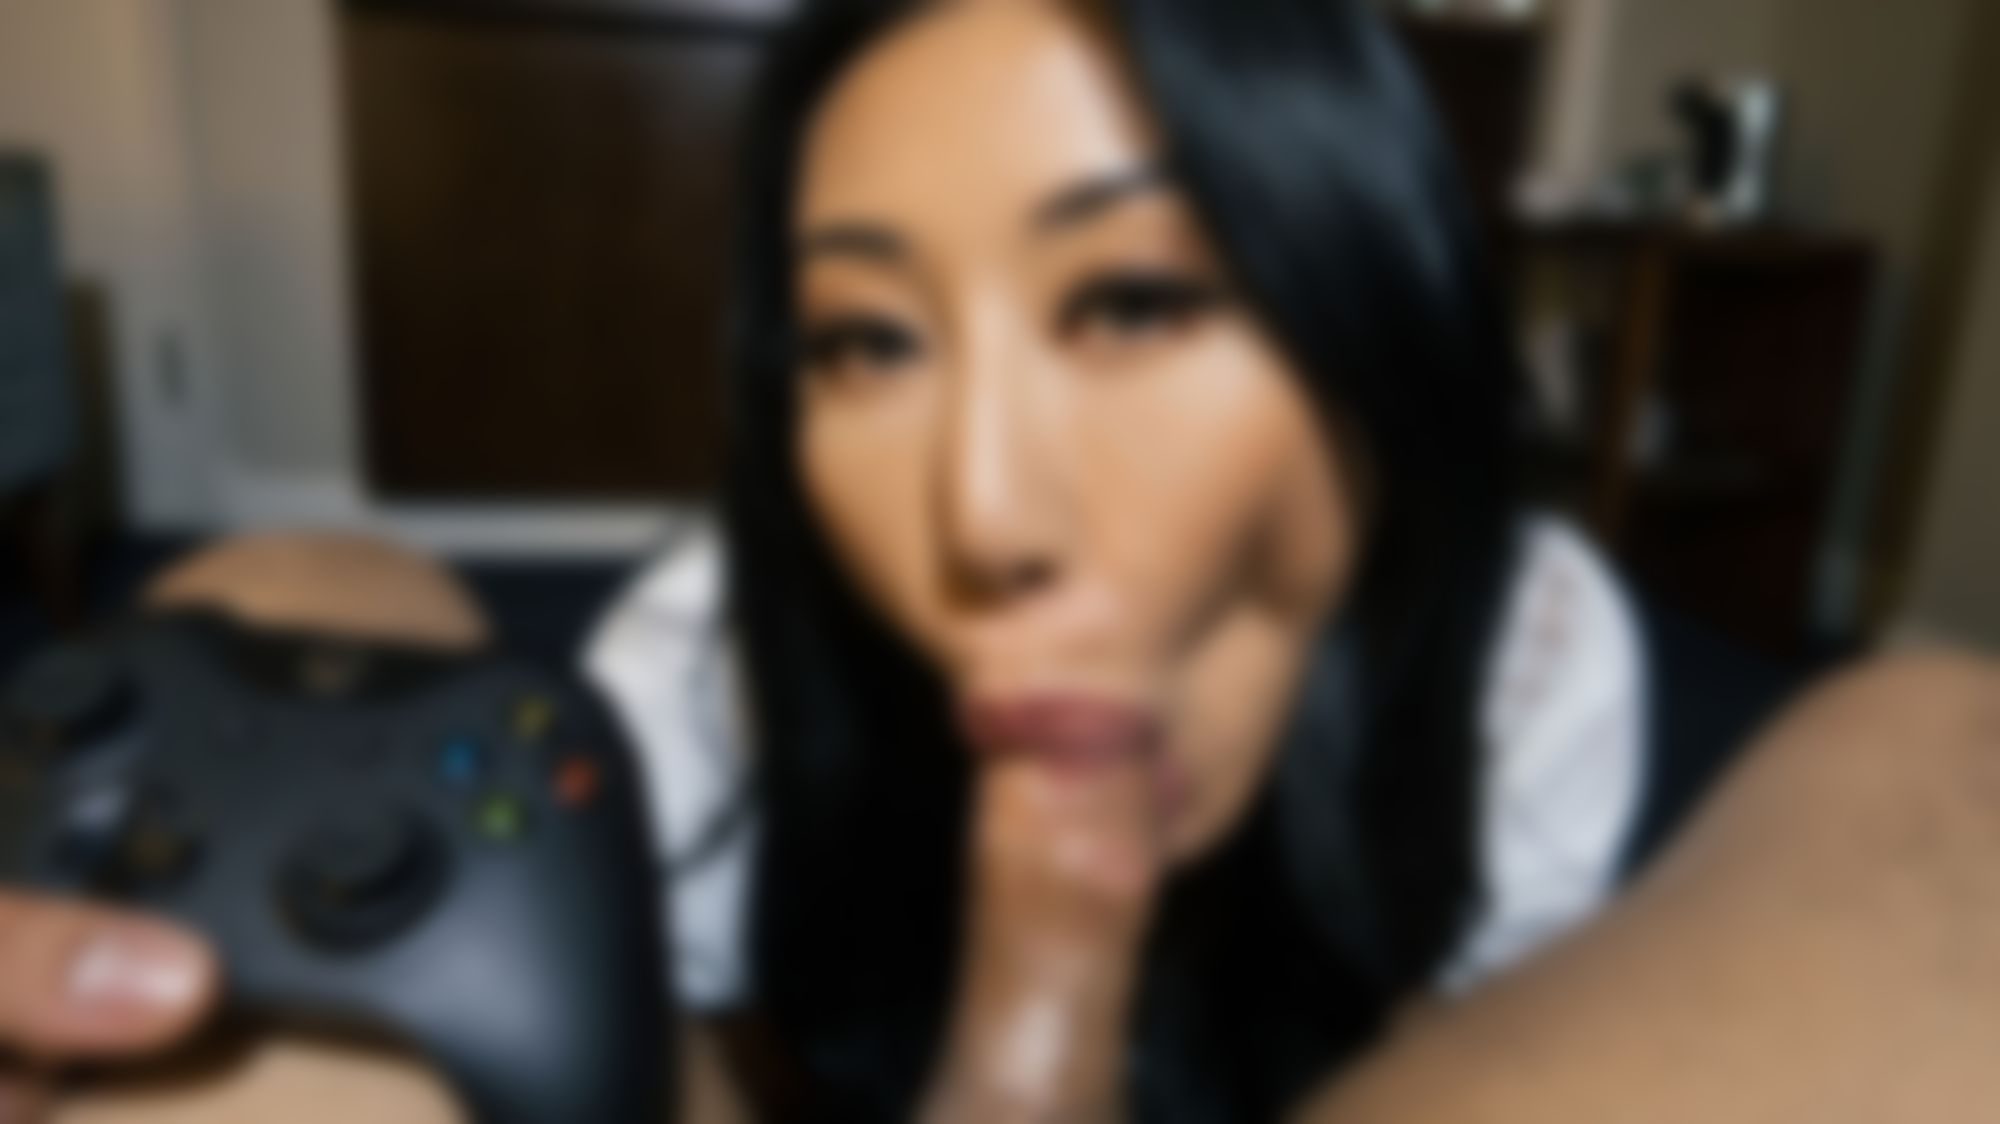 nicoledoshi : Sucking You and Riding Your Cock While You Play Video Games